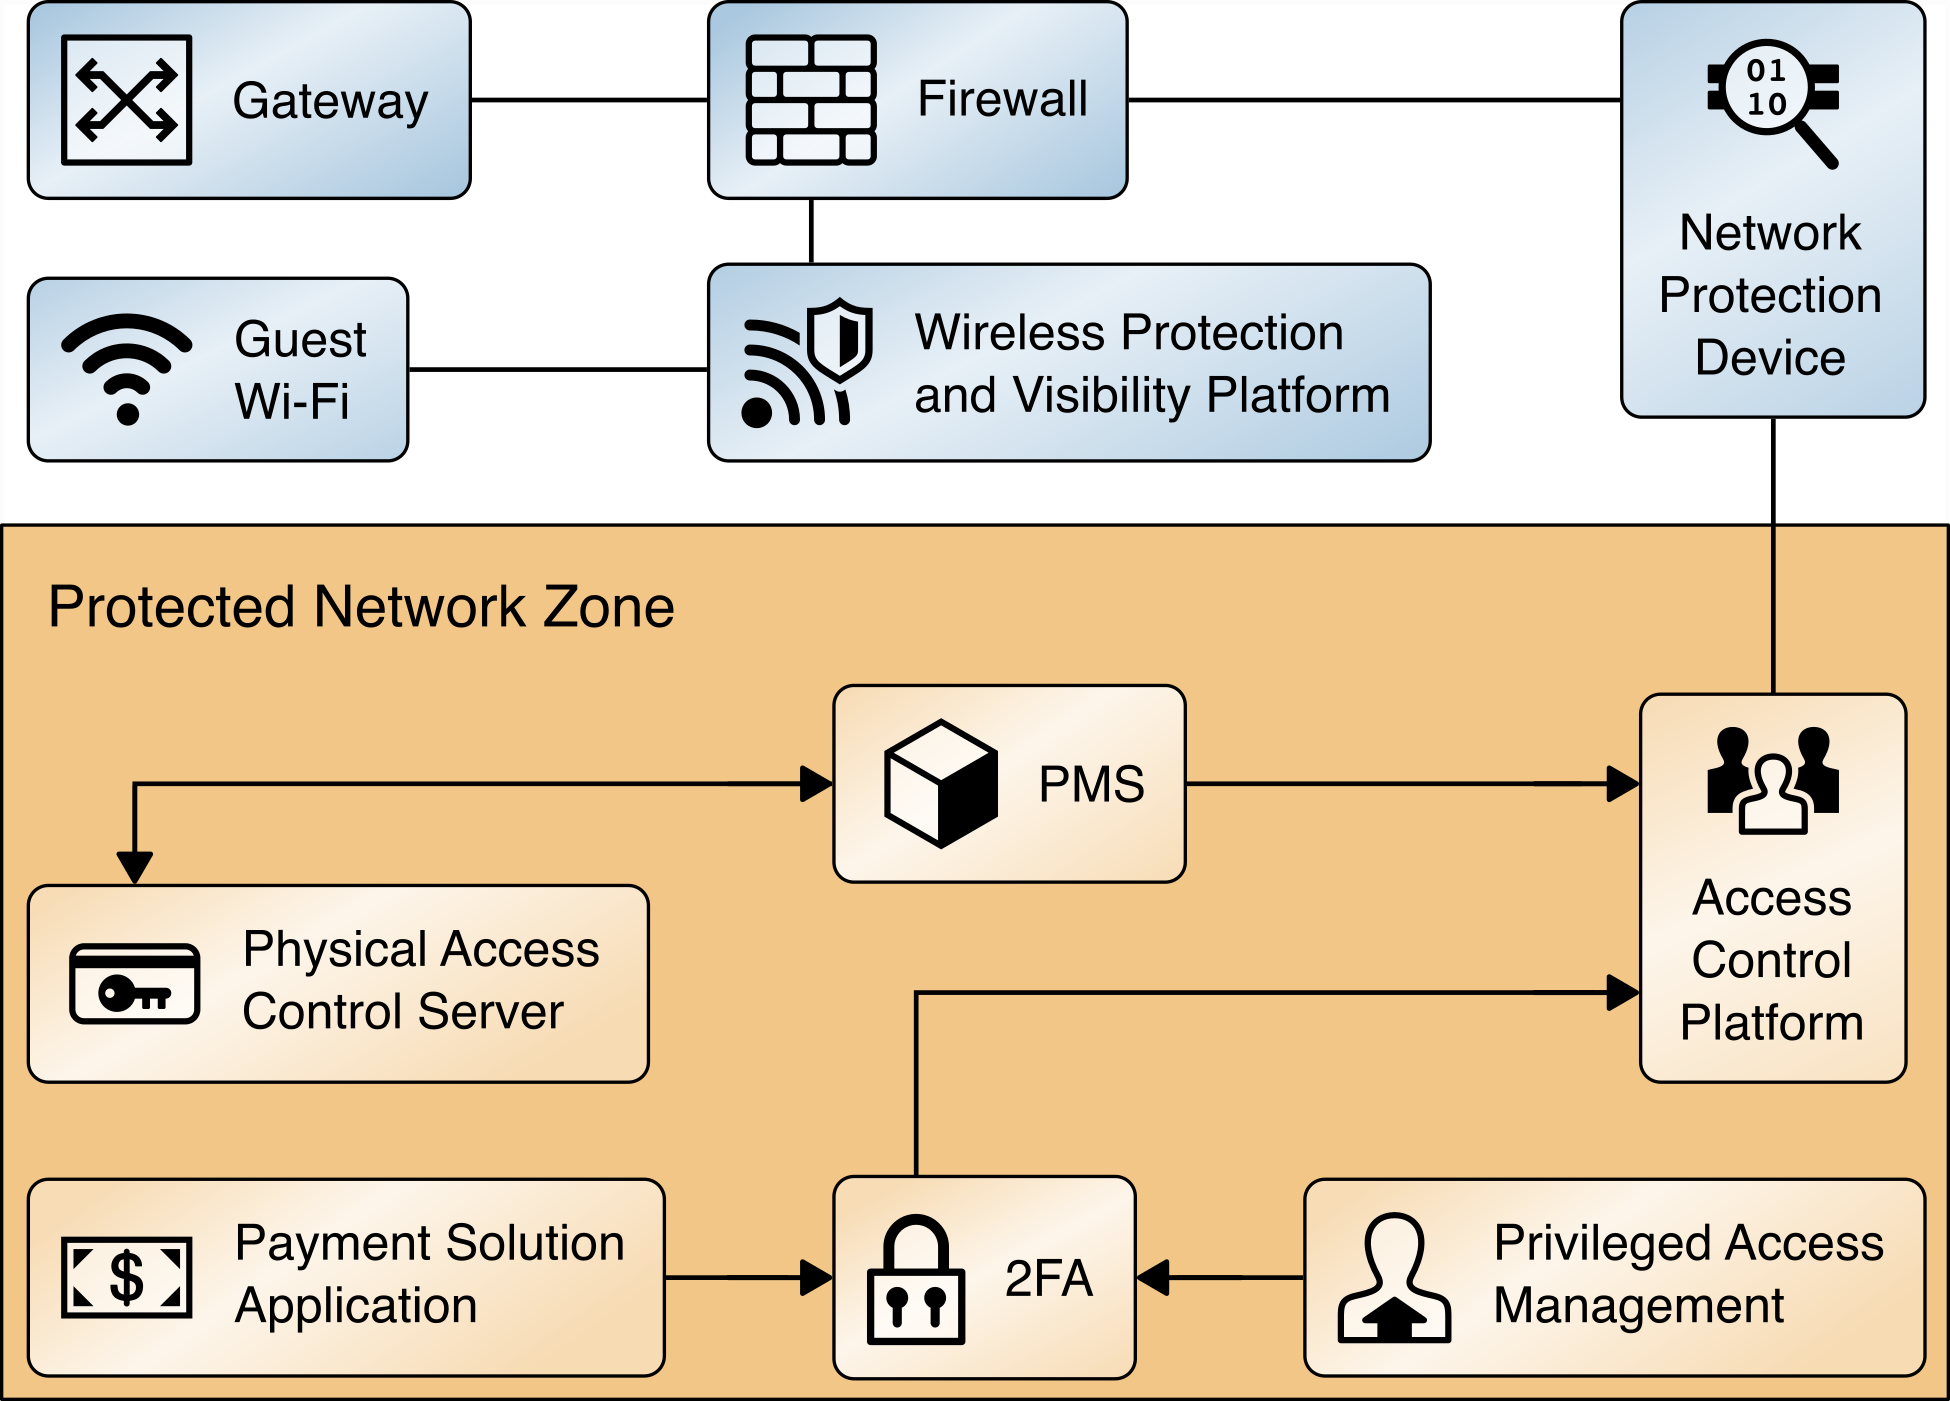 The high level architecture of the secure PMS system. Internet access goes through a Network Protection Device, and guest wi-fi access goes through a Wireless Protection and Visibility Platform. Within the Protected Network Zone is the PMS, the Access Control Platform, the Physical Access Control Server, the 2FA, the Privileged Access Management, and the Payment Solution Application.